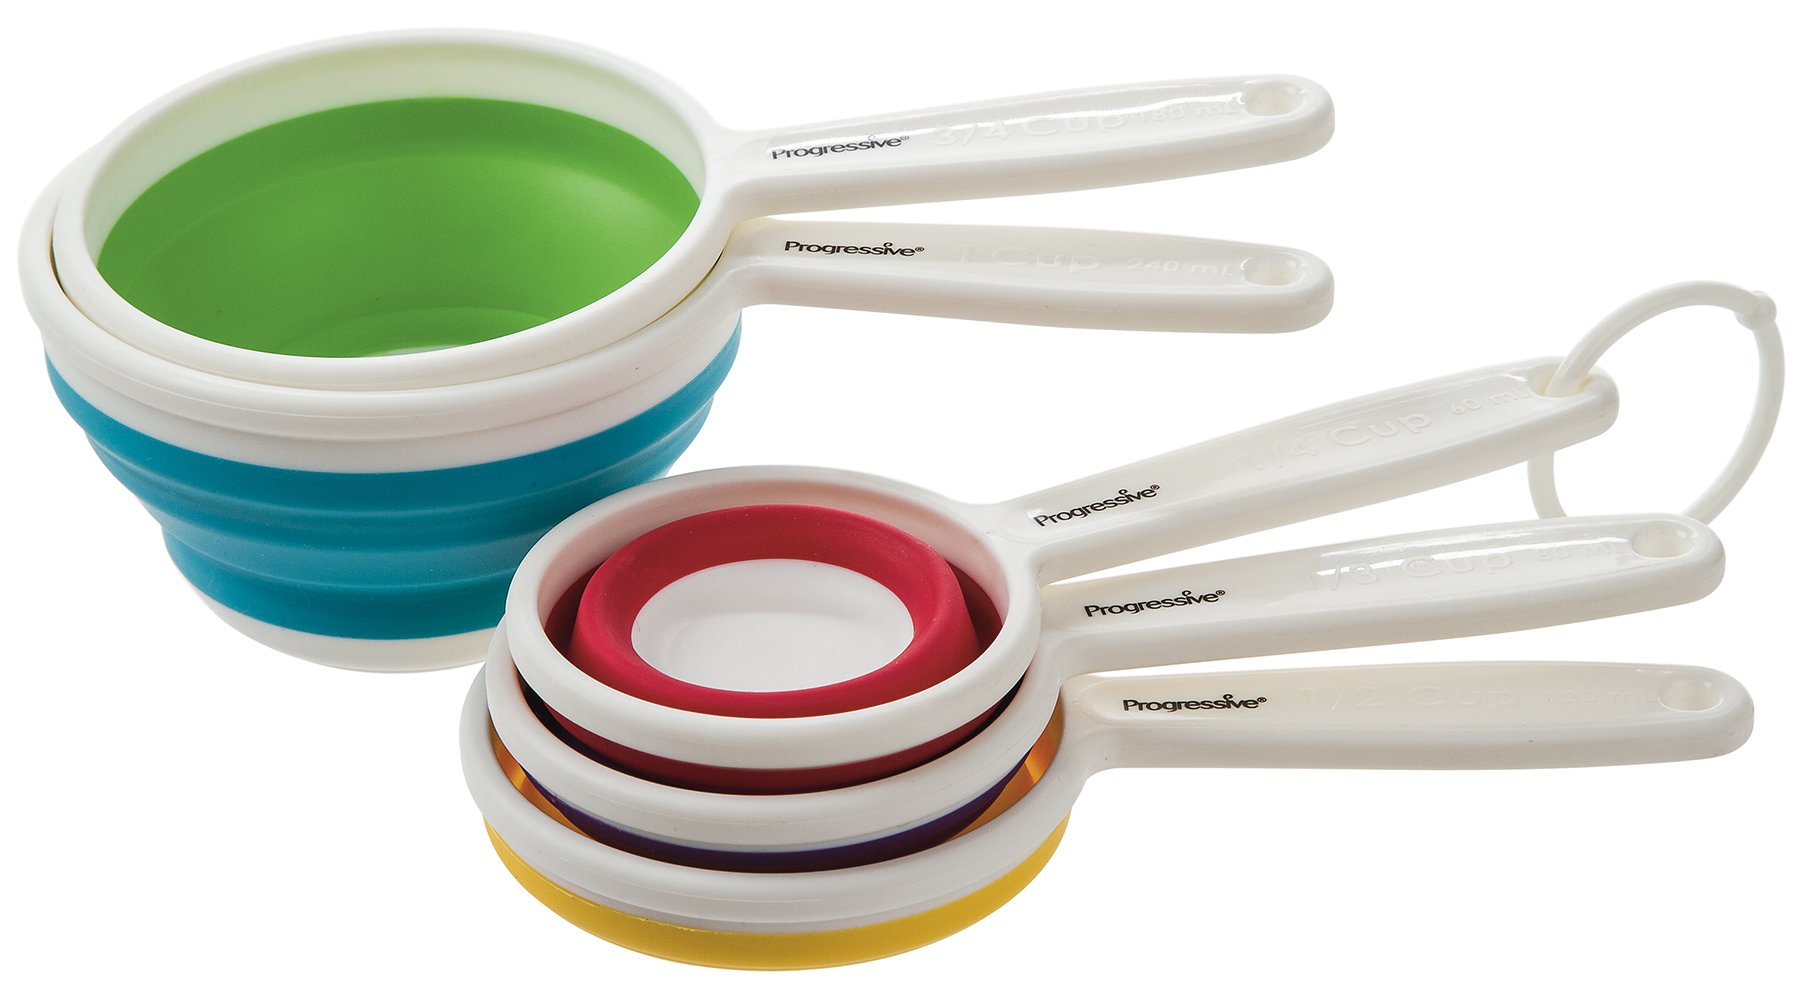 Prepworks by Progressive Collapsible Measuring Cups - Set of 5, Space Savin